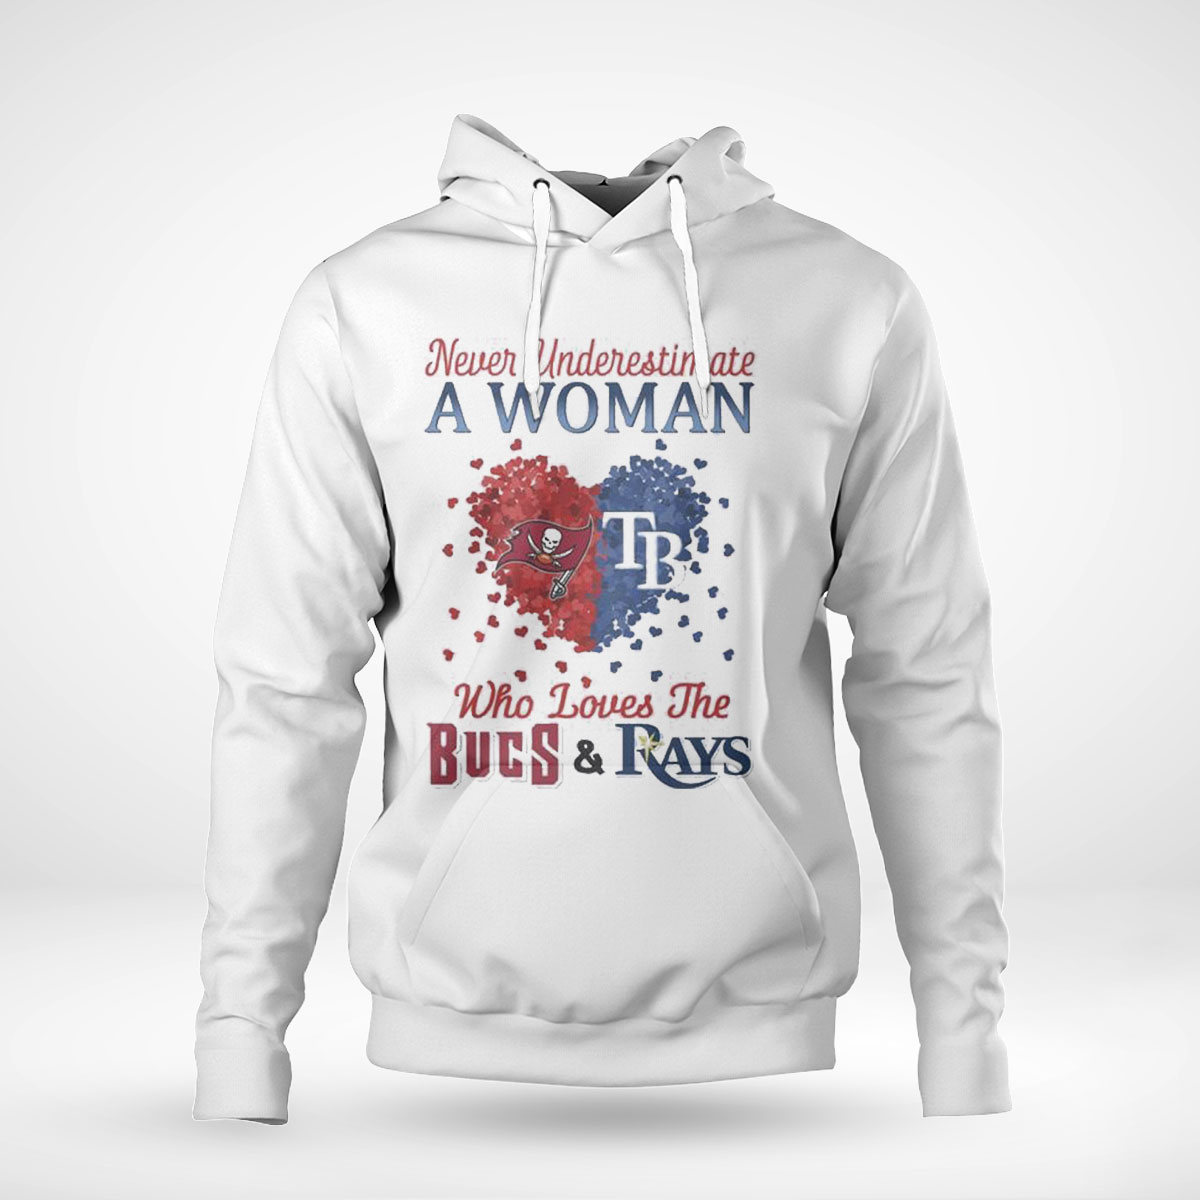 Hearts Never Underestimate A Woman Who Loves The Tampa Bay Buccaneers And Tampa Bay Rays T-shirt